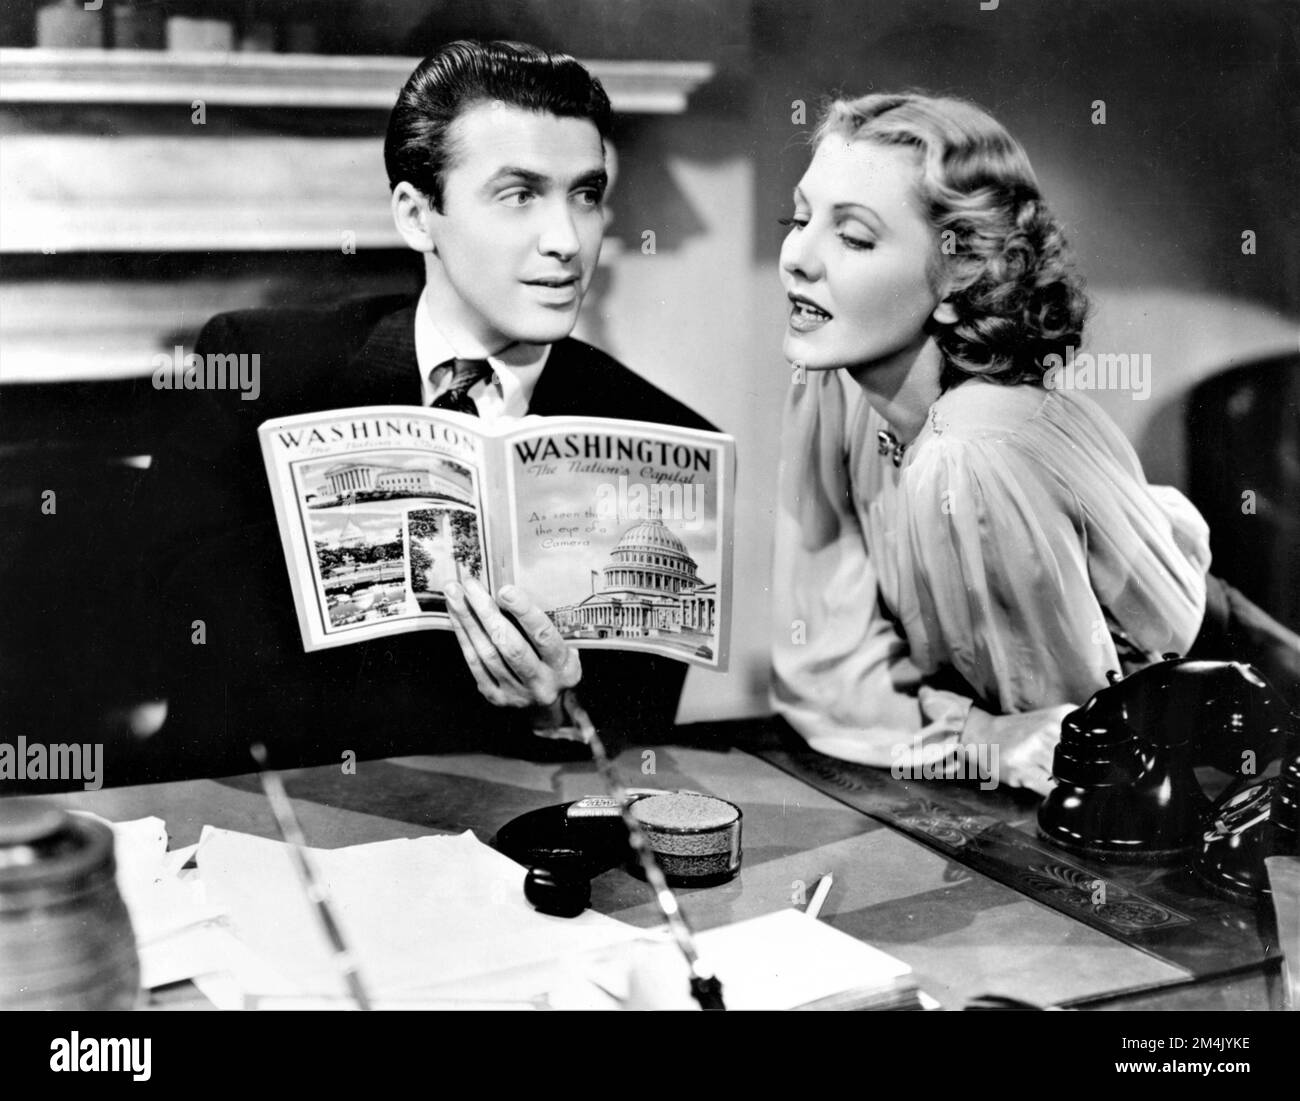 JAMES STEWART and JEAN ARTHUR in MR. SMITH GOES TO WASHINGTON 1939 director FRANK CAPRA story Lewis R. Foster screenplay Sidney Buchman music Dimitri Tiomkin Columbia Pictures Stock Photo